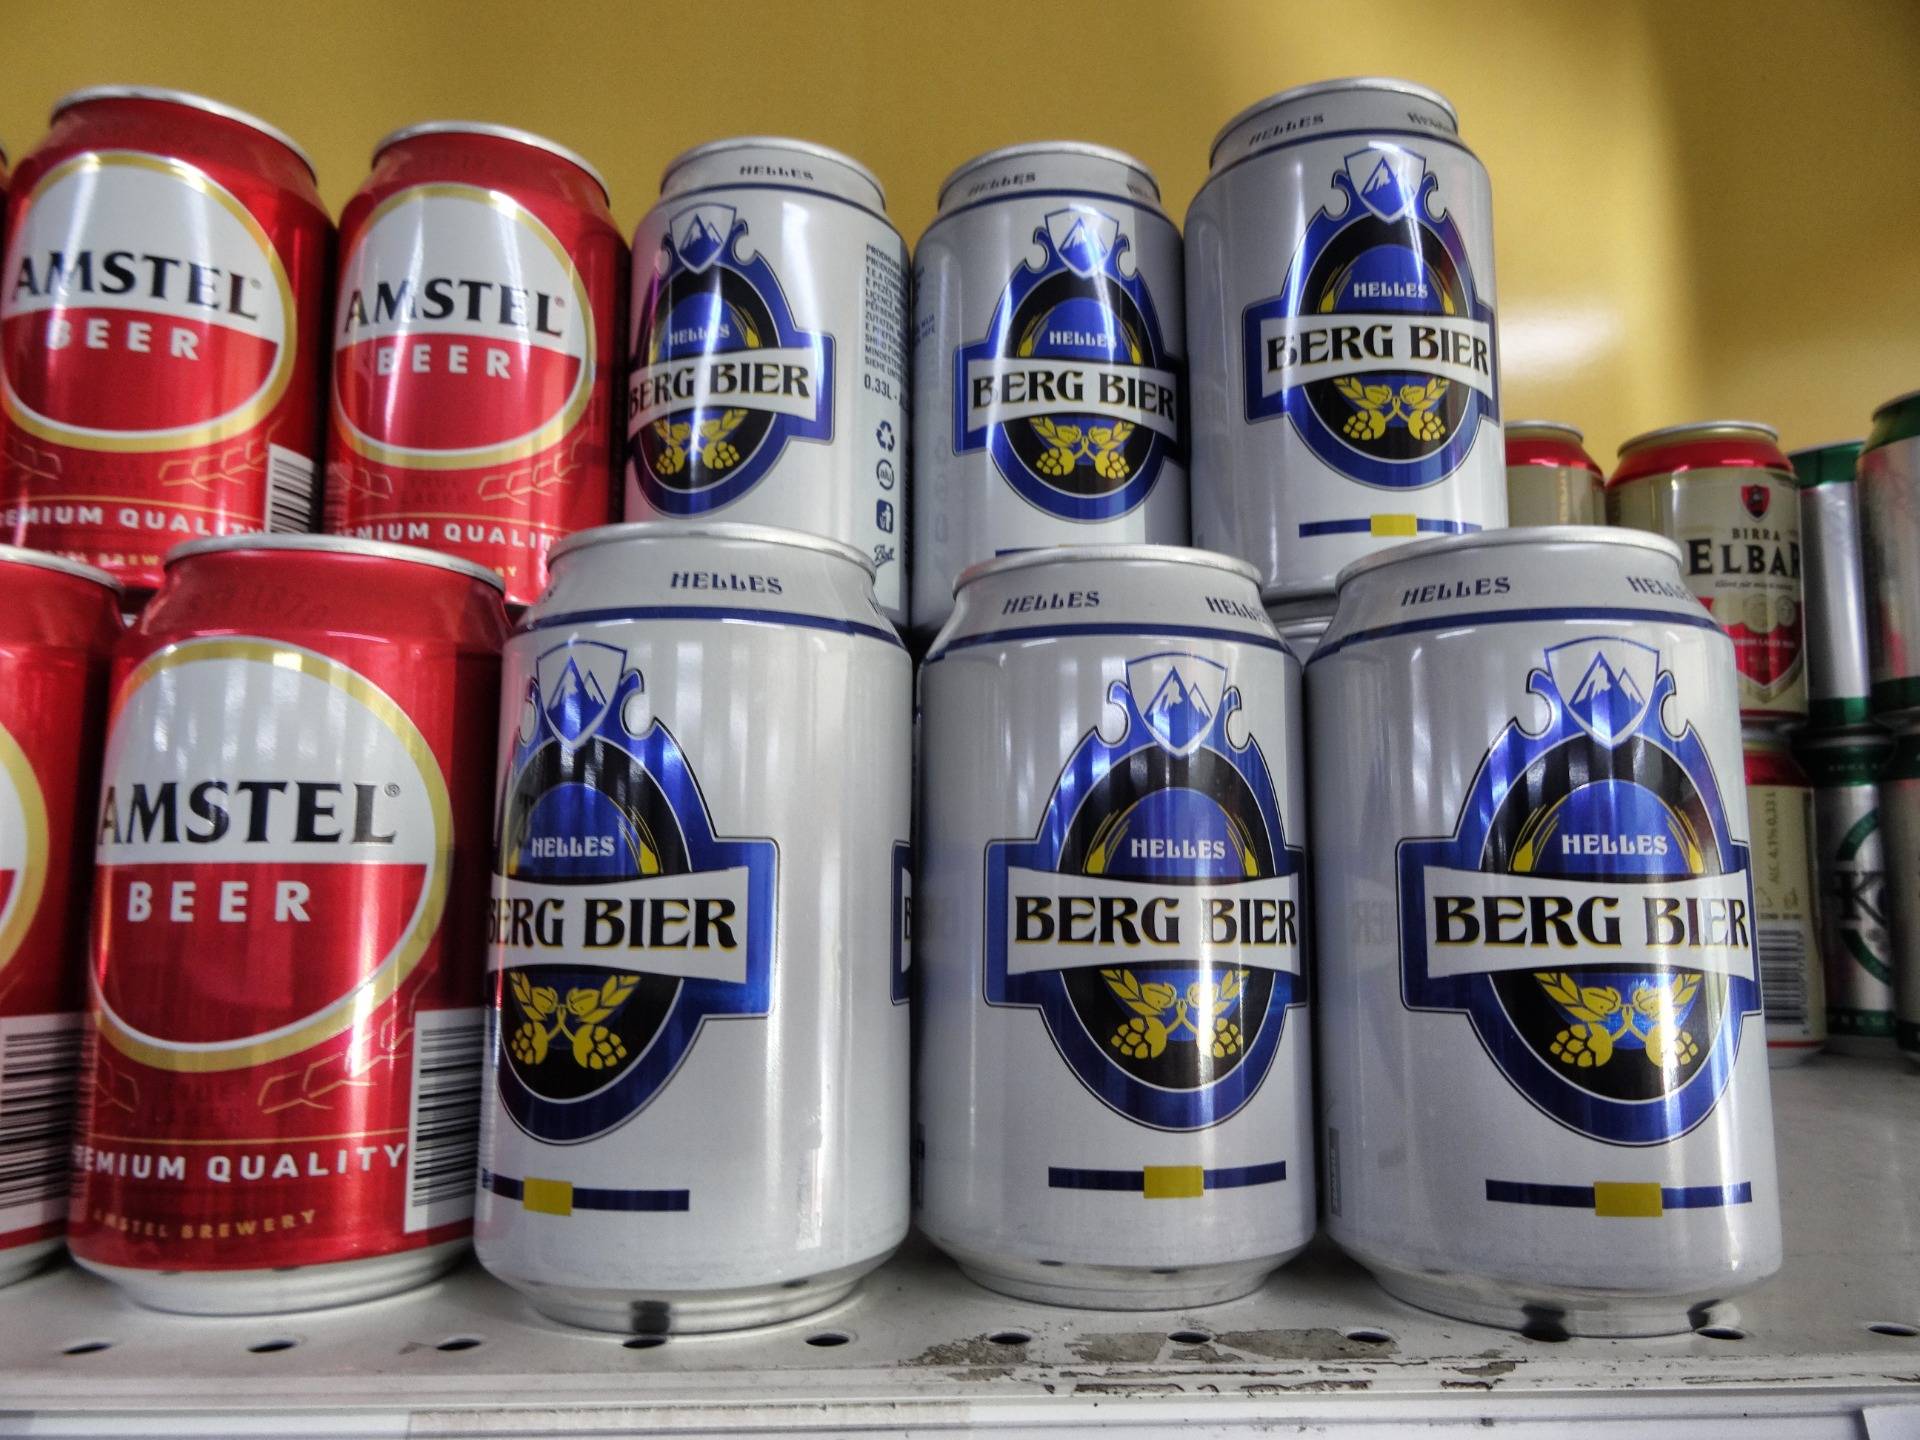 You will find ”german” beer that has never seen Germany